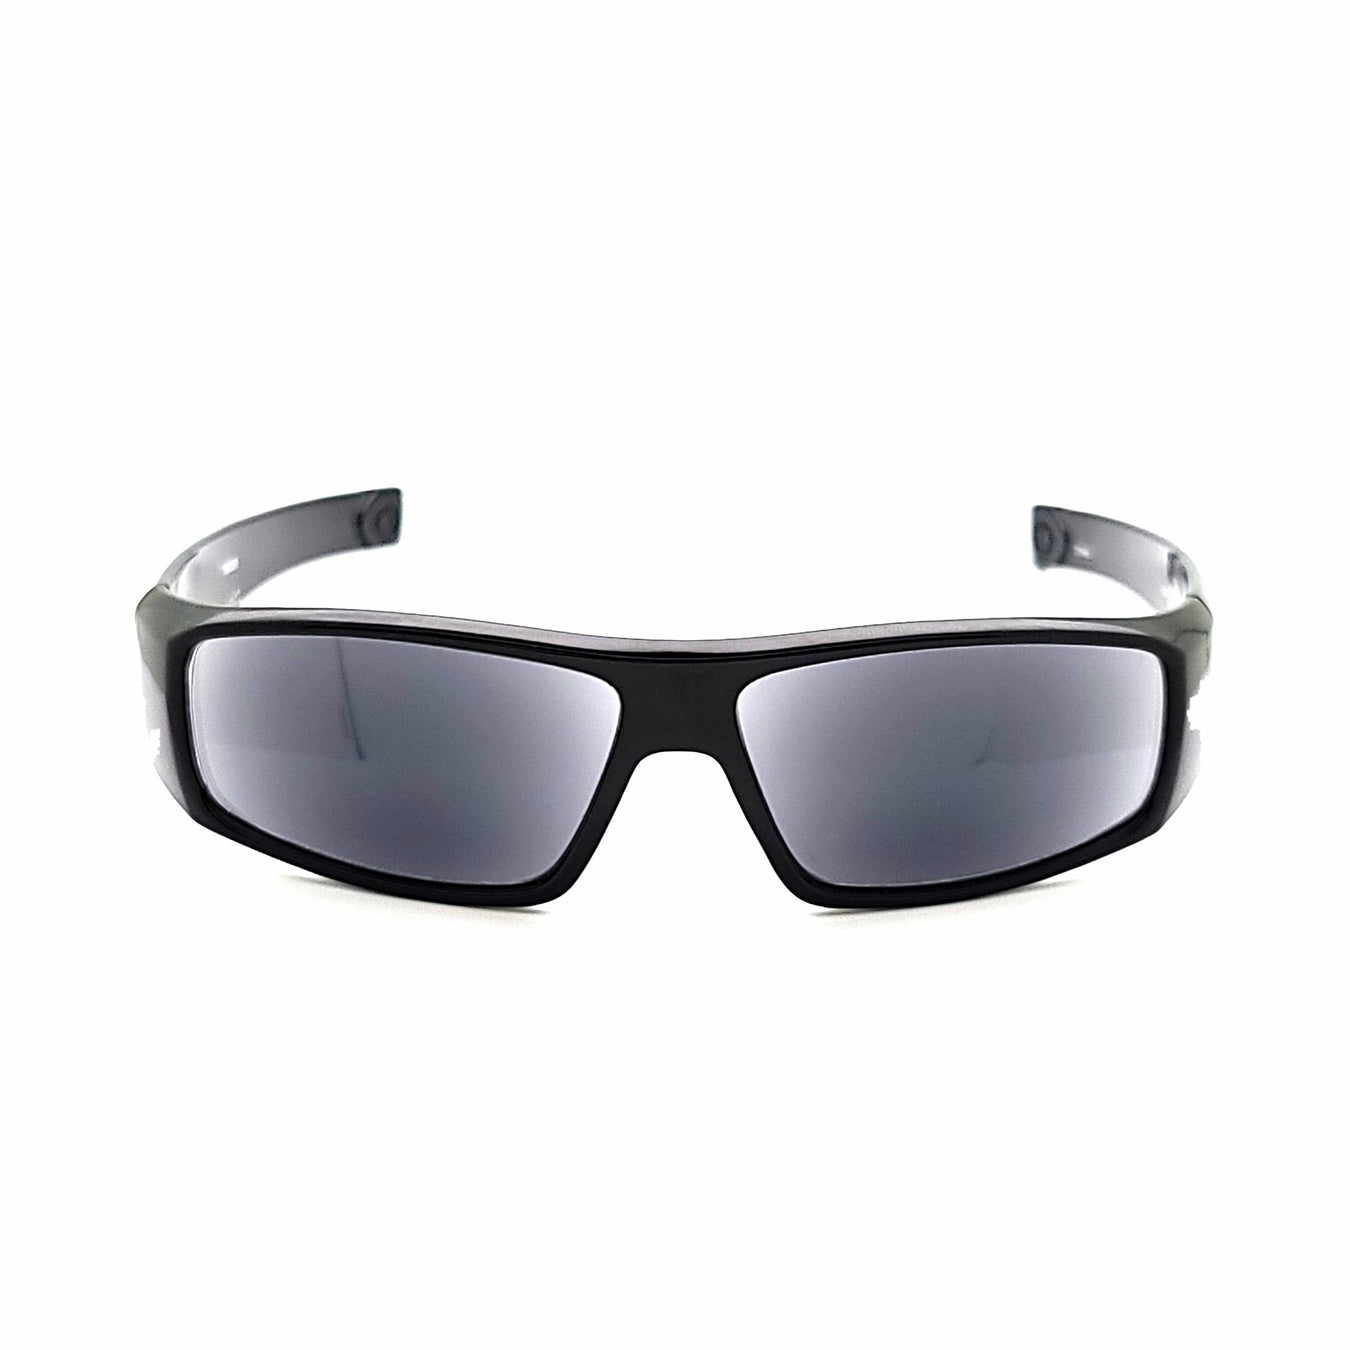 Fully magnified single power reading sunglass in tortoise frame with spring hinges